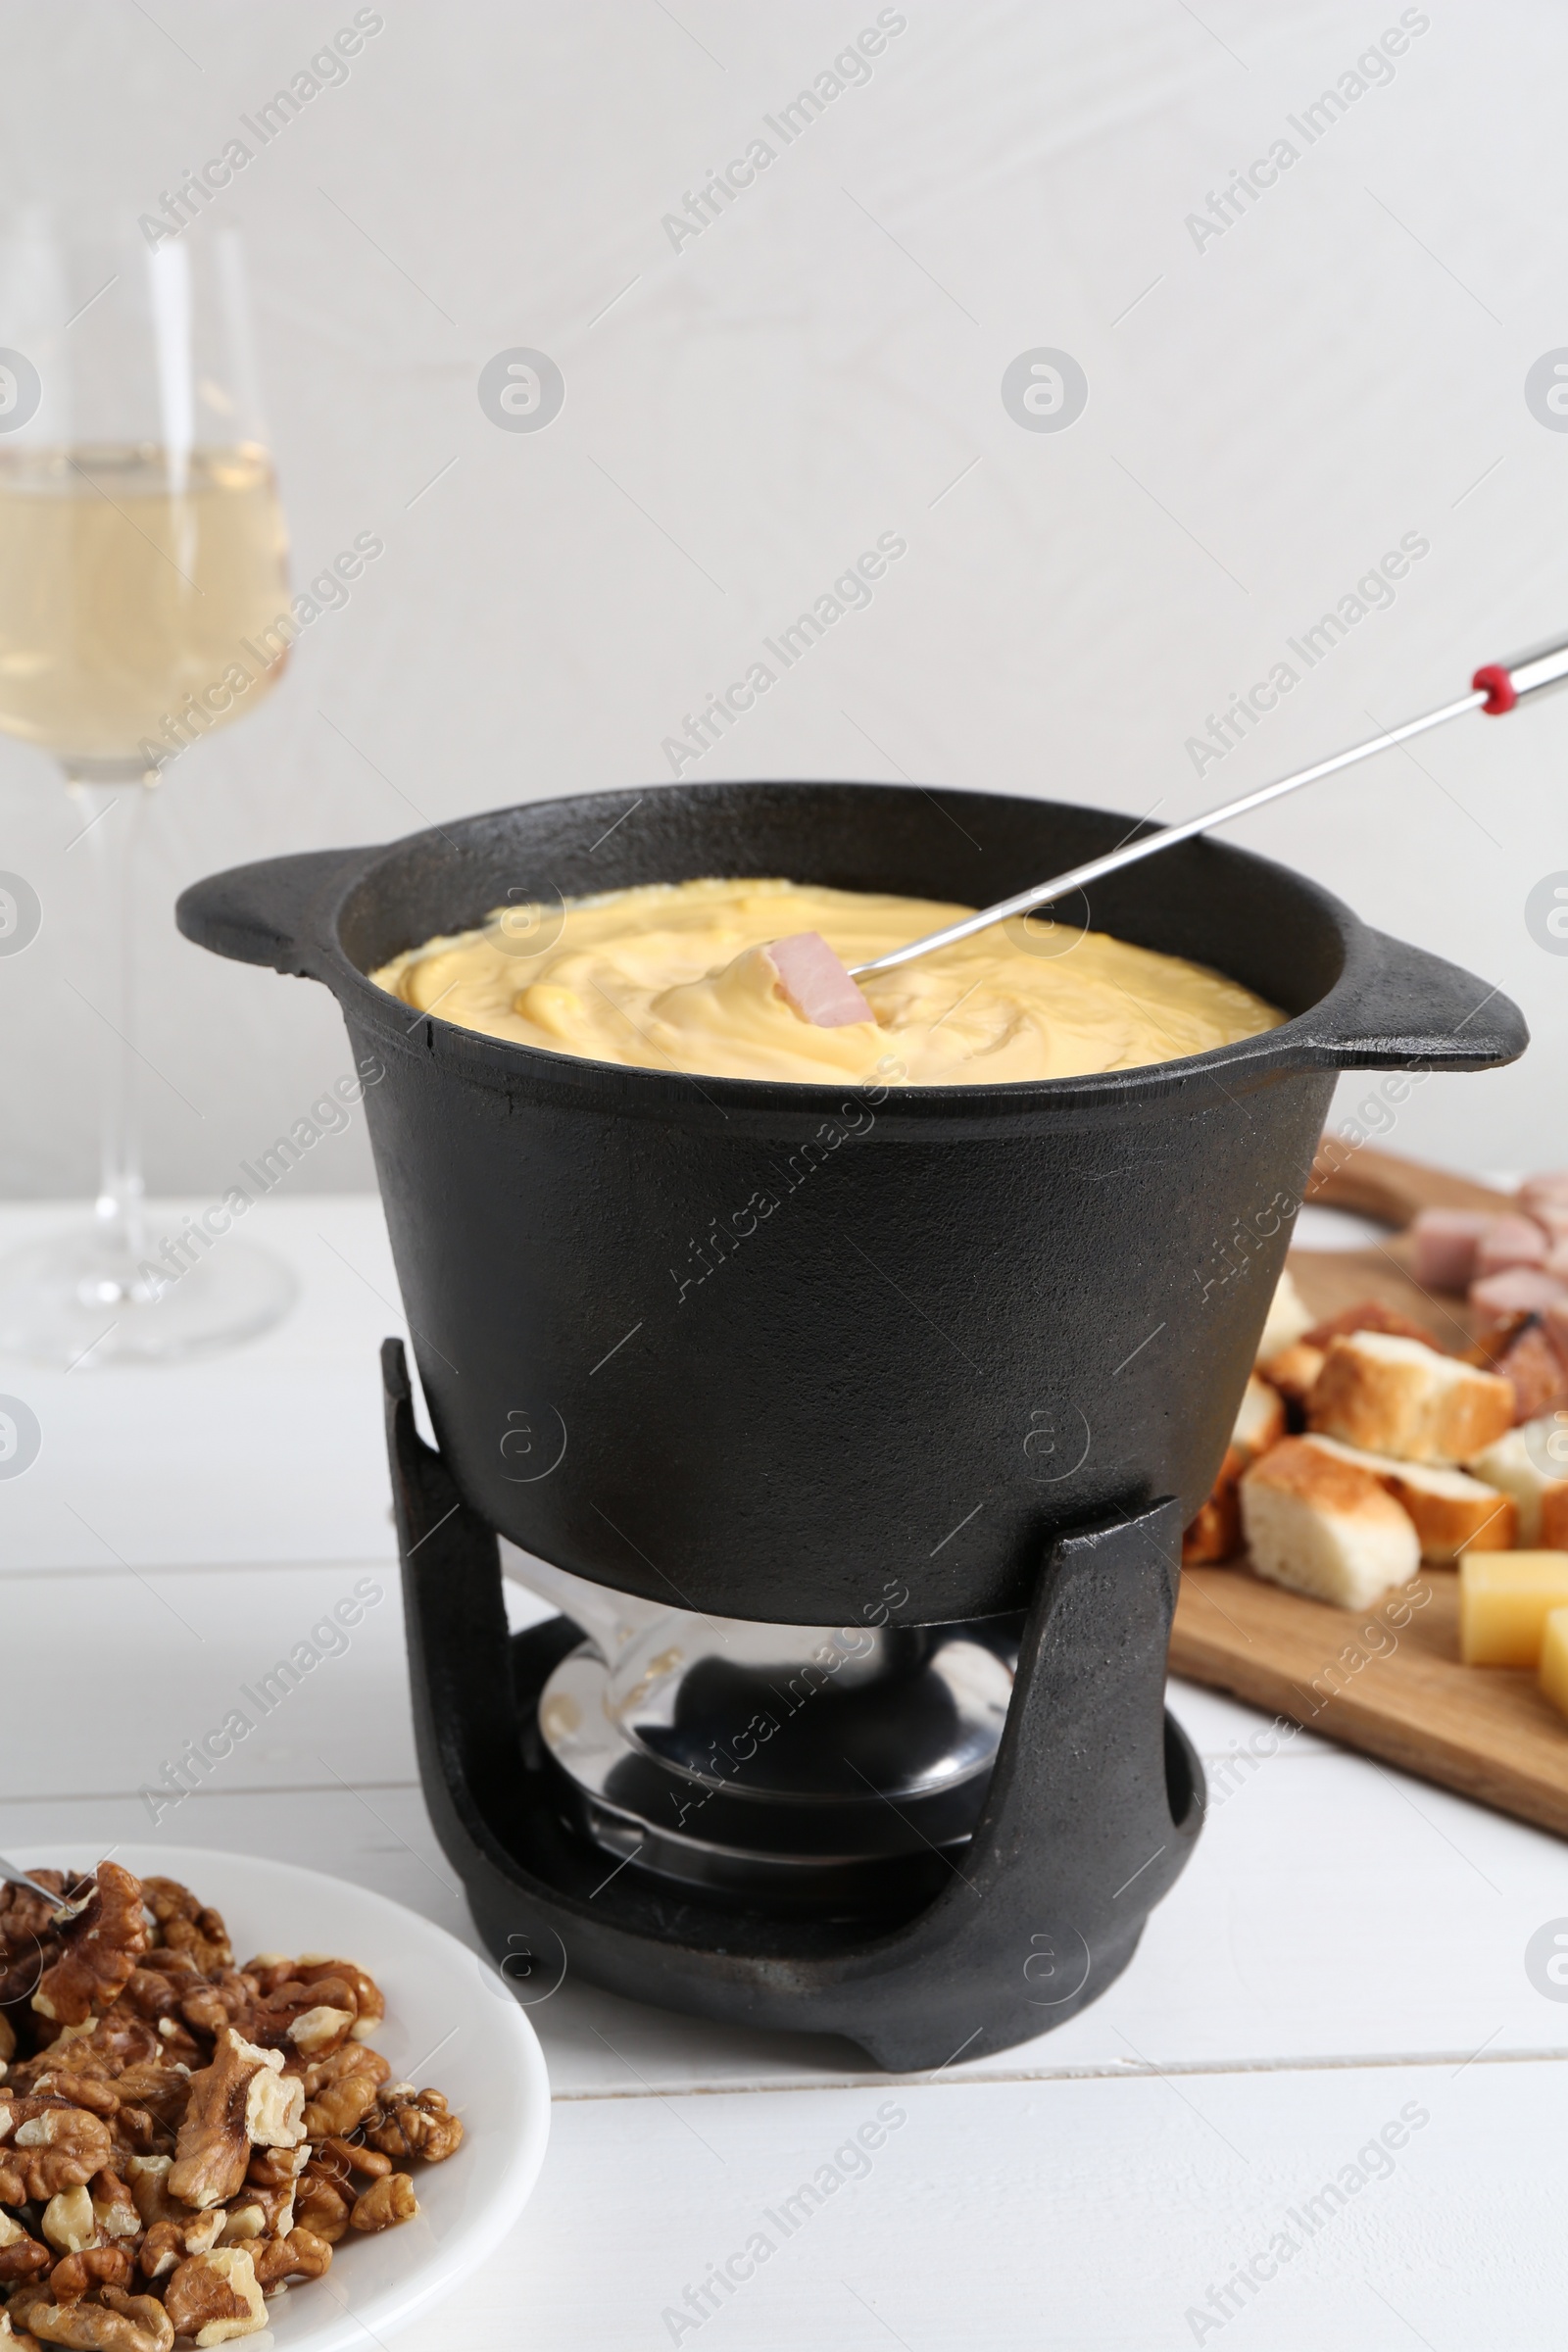 Photo of Fondue pot with tasty melted cheese, fork and different snacks on white wooden table